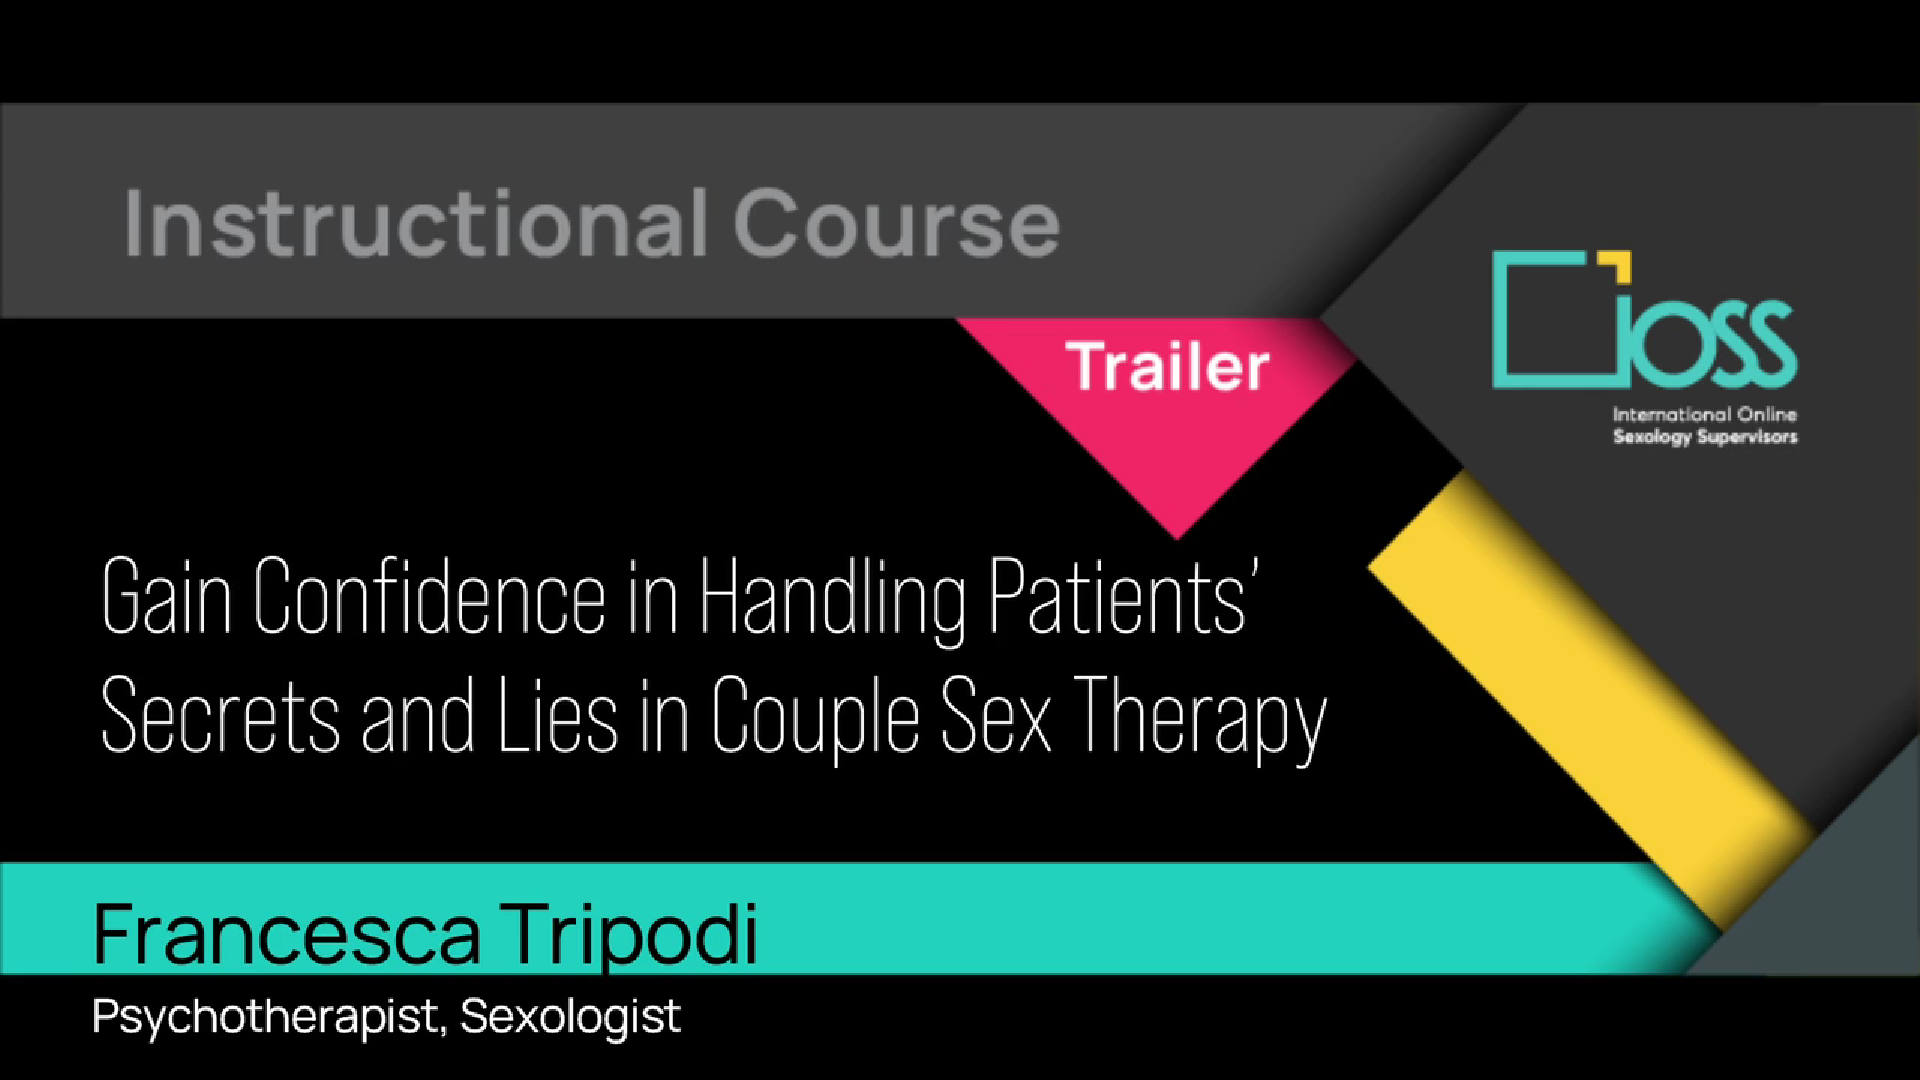 Trailer Gain Confidence in Handling patients’ Secrets and Lies in Couple Sex Therapy (Part 1 & 2)